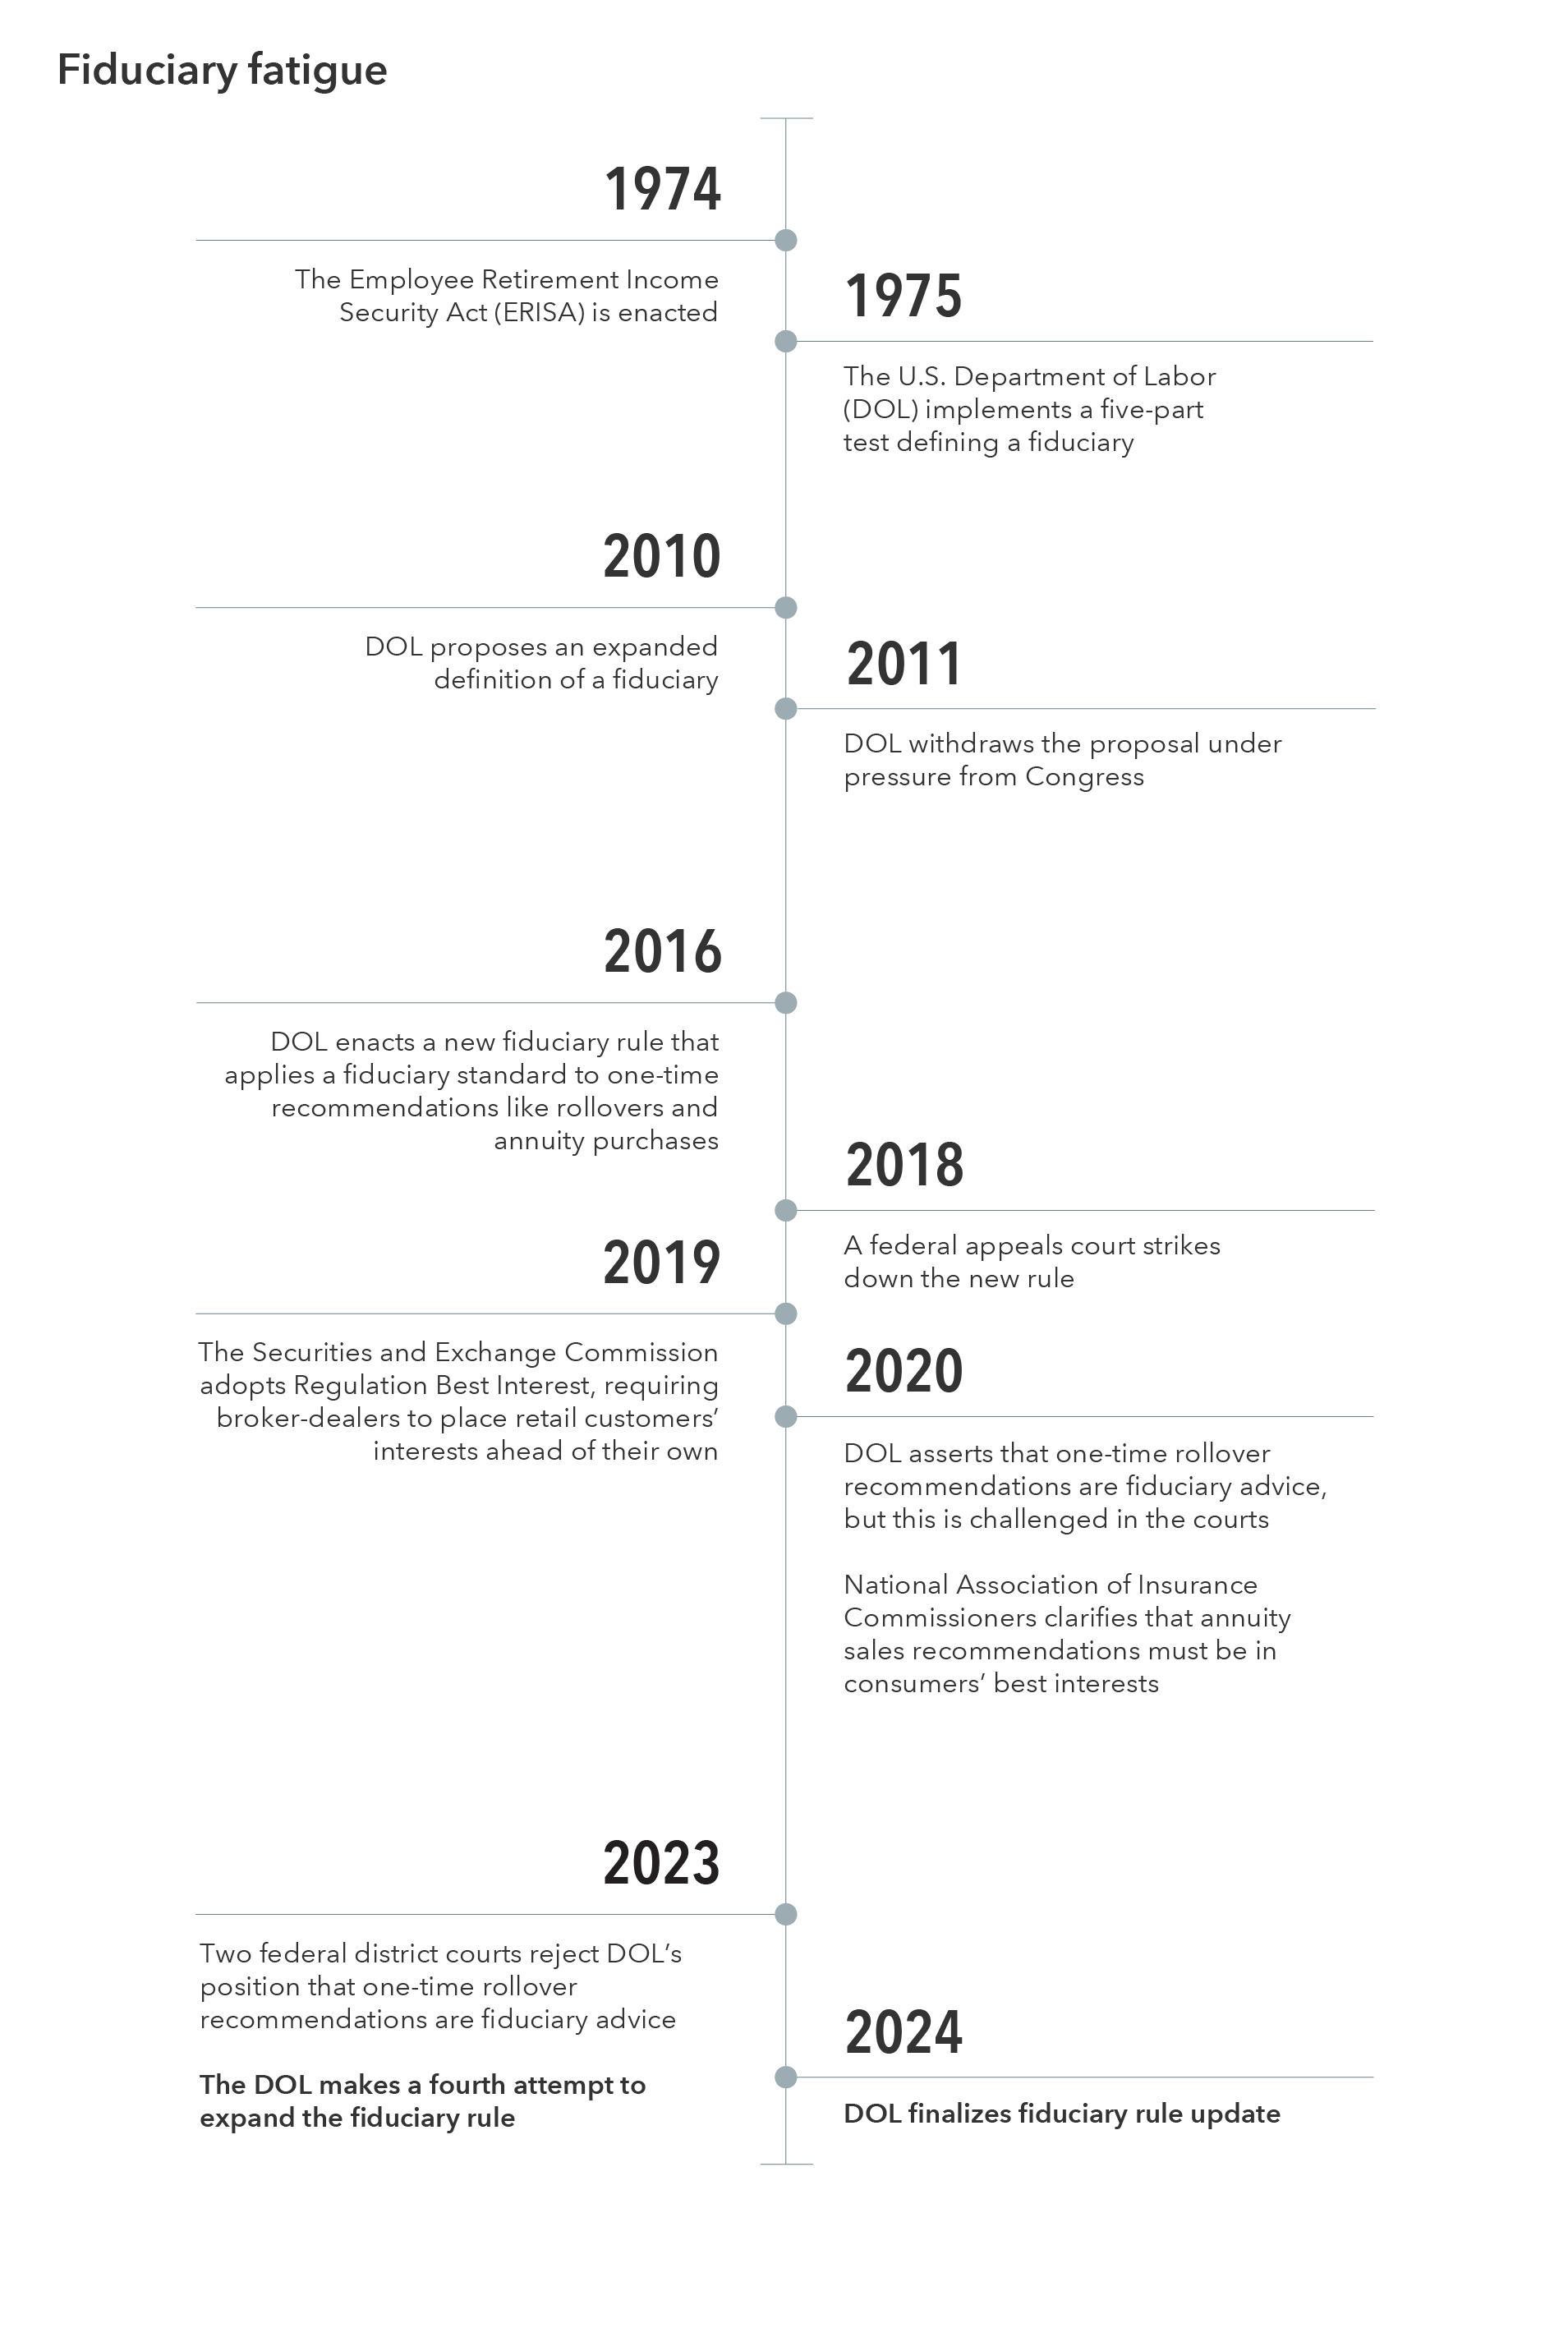 Timeline presents key events surrounding the U.S. Department of Labor’s (DOL) fiduciary rule and other regulations related to investment advice. The exhibit is titled “Fiduciary fatigue.” It displays the following events: 1974, the Employee Retirement Income Security Act (ERISA) is enacted; 1975, the U.S. Department of Labor implements a five-part test defining a fiduciary; 2010, DOL proposes an expanded definition of a fiduciary; 2011, DOL withdraws the proposal under pressure from Congress; 2016, DOL enacts a new fiduciary rule that applies a fiduciary standard to one-time recommendations like rollovers and annuity purchases; 2018, a federal appeals court strikes down the new rule; 2019, the Securities and Exchange Commission adopts Regulation Best Interest, requiring broker-dealers to place retail customers’ interests ahead of their own; 2020, DOL asserts that one-time rollover recommendations are fiduciary advice, but this is challenged in the courts; 2020, National Association of Insurance Commissioners clarifies that annuity sales recommendations must be in consumers’ best interests; 2023, two federal district courts reject DOL’s position that one-time rollover recommendations are fiduciary advice; 2023, the DOL makes a fourth attempt to expand the fiduciary rule; 2024, DOL finalizes fiduciary rule update.